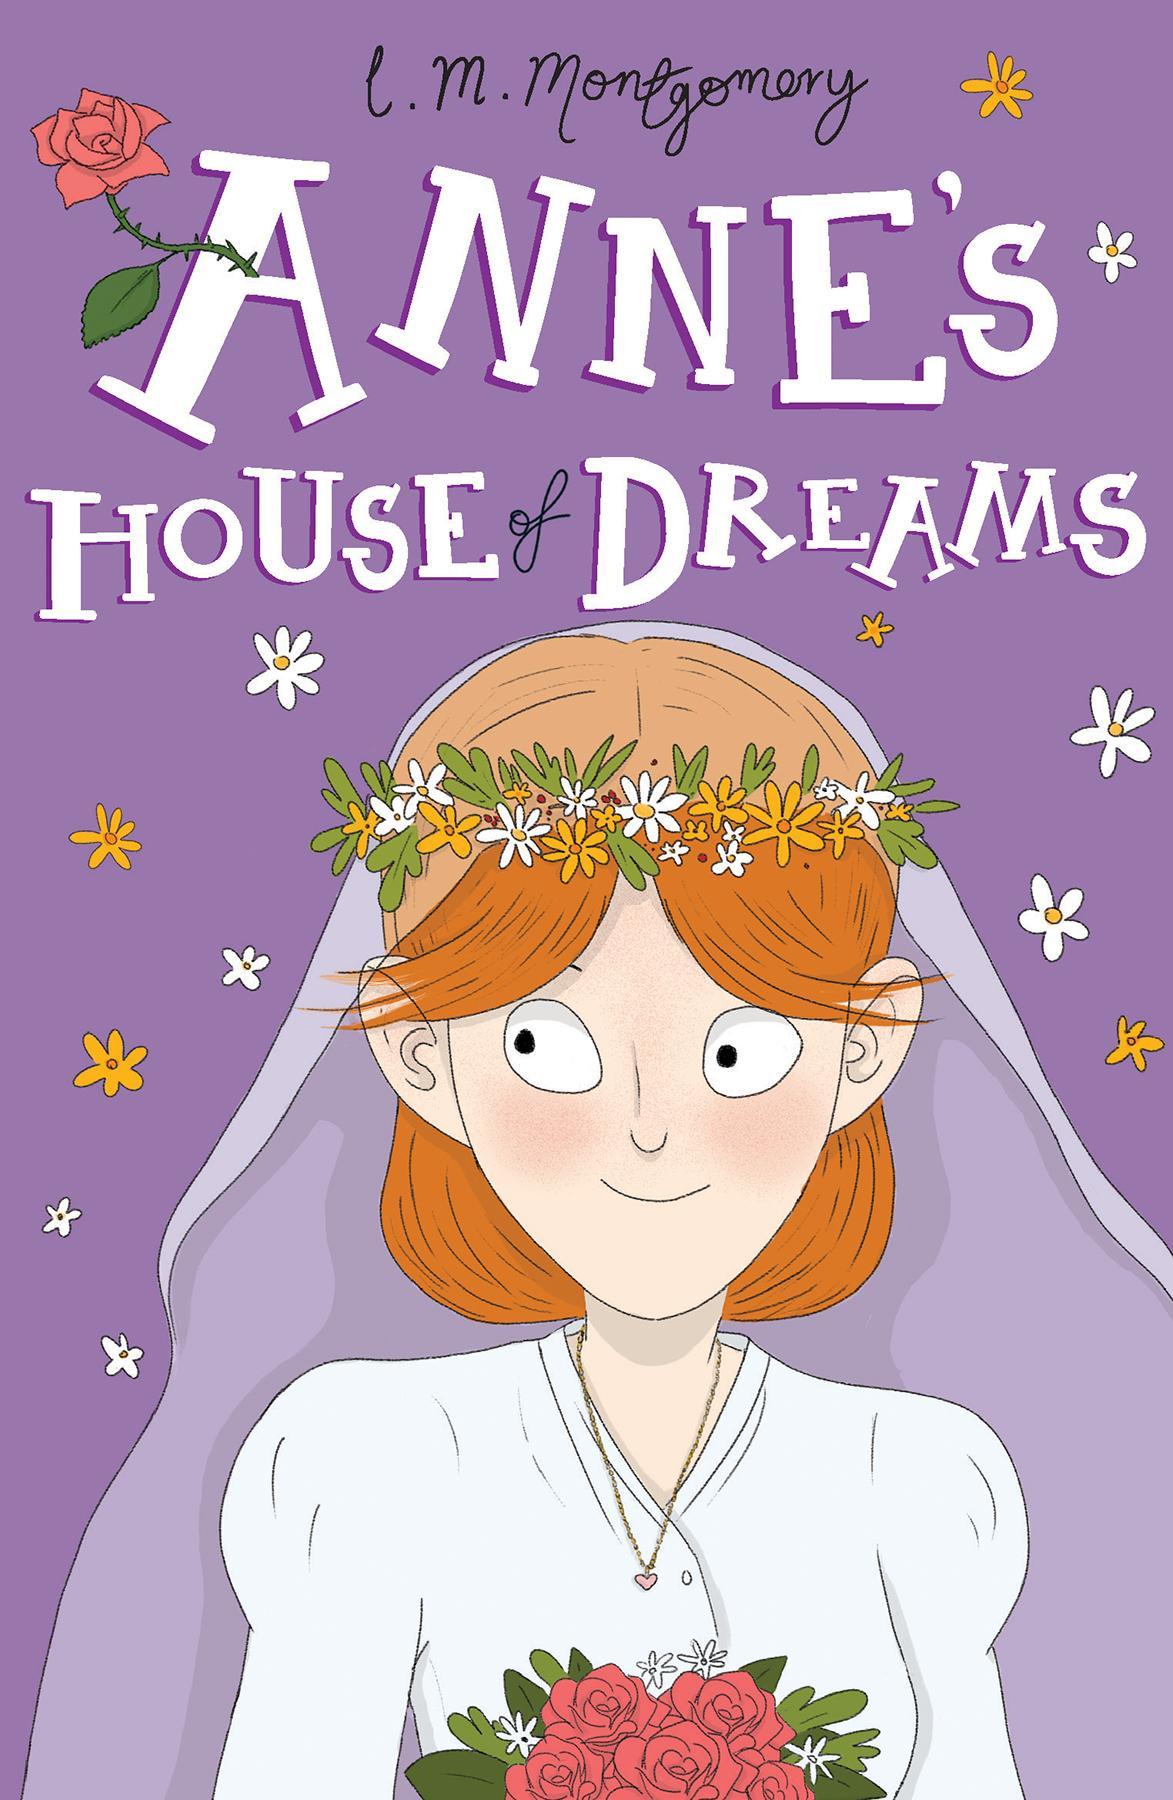 Anne's House of Dreams - LM Montgomery